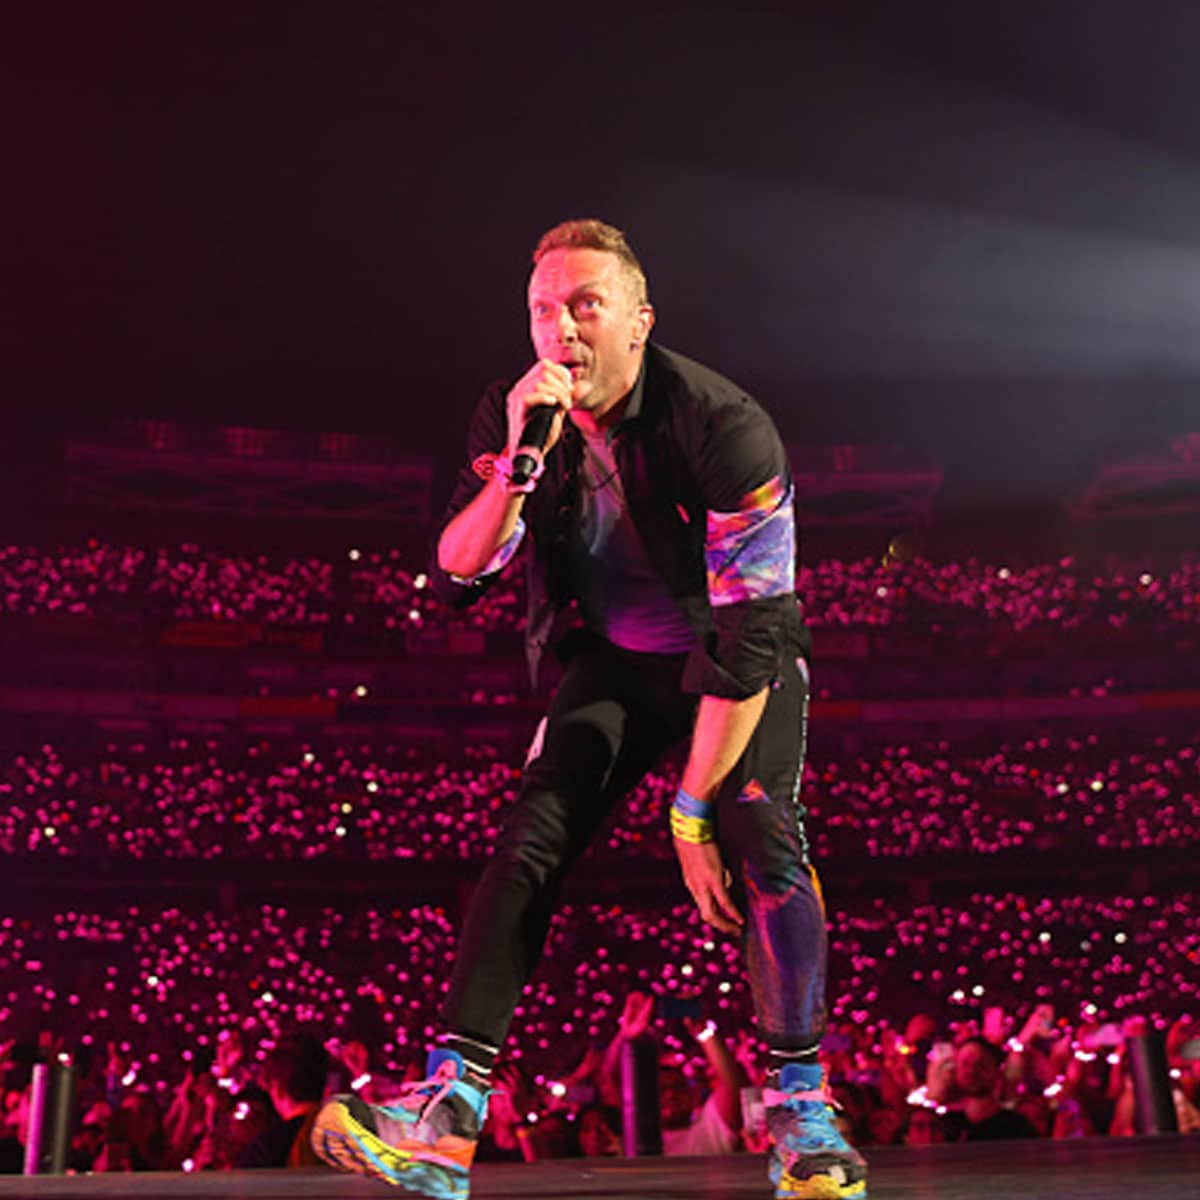 Chris Martin of Coldplay performs onstage during their "Music of the Spheres" trip